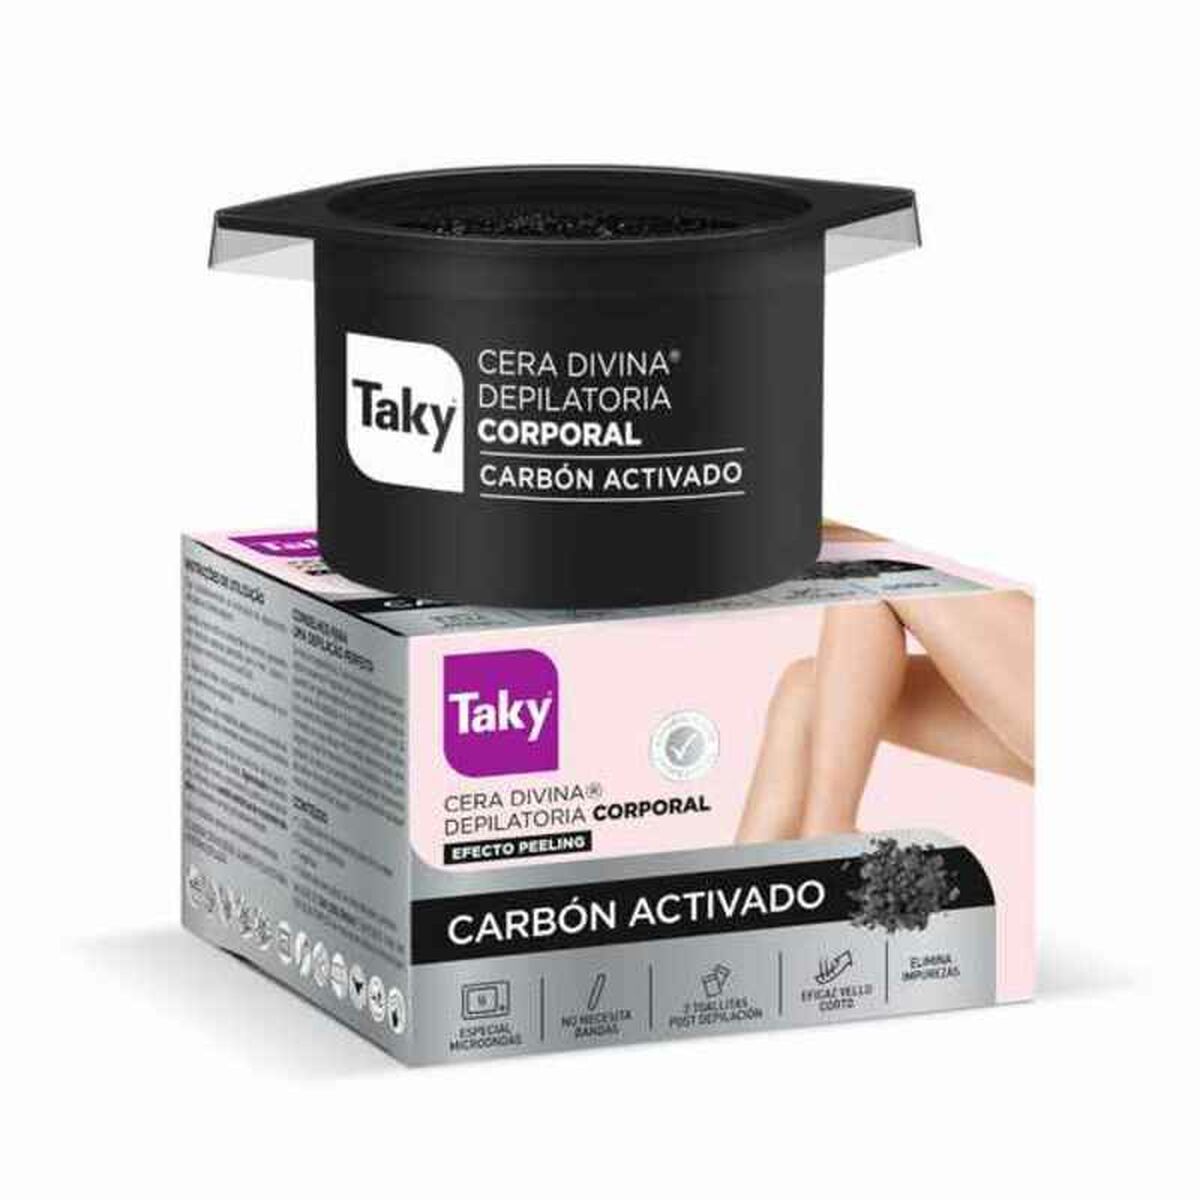 Ontharingswax Lichaam Carbon Activado Taky 1106-01799 300 ml